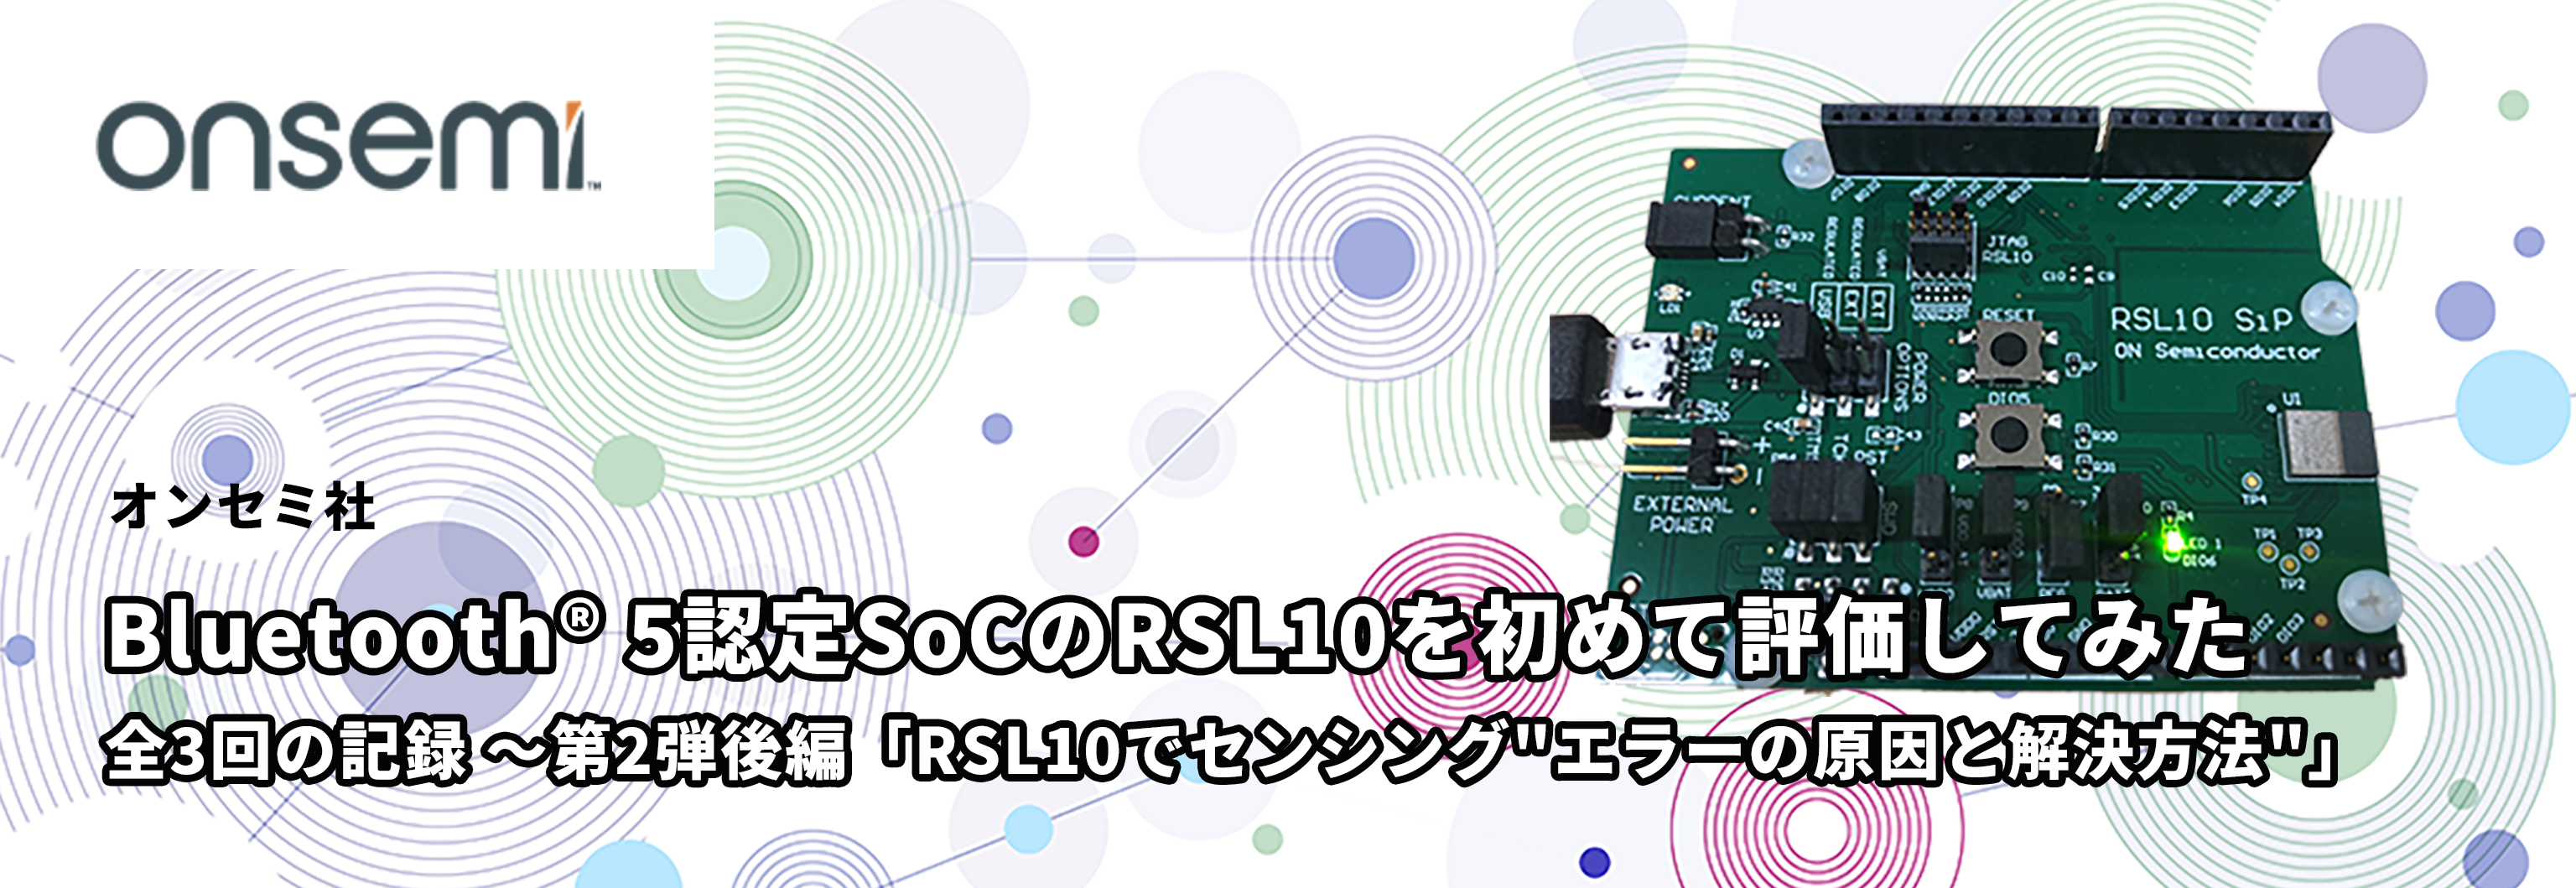 A Record of All 3 Evaluations of the Bluetooth® 5 Certified SoC RSL10 for the First Time ~ Part 2 Part 1 "Sensing with RSL 10 ``Error Causes and Solutions''"